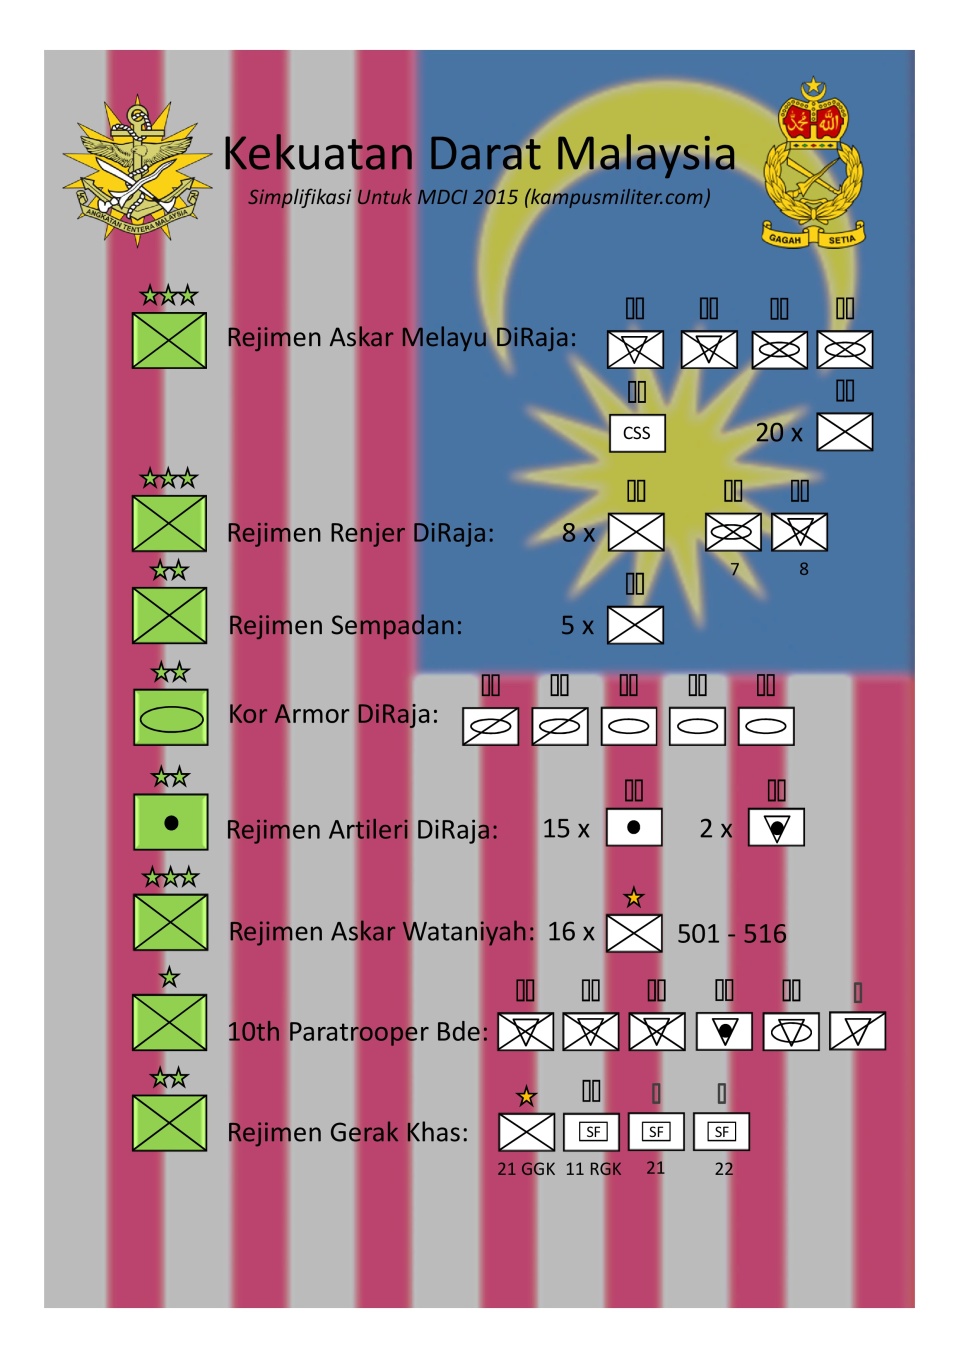 Malaysian Ground Forces Order of Battle, simplified for MDCI 2015